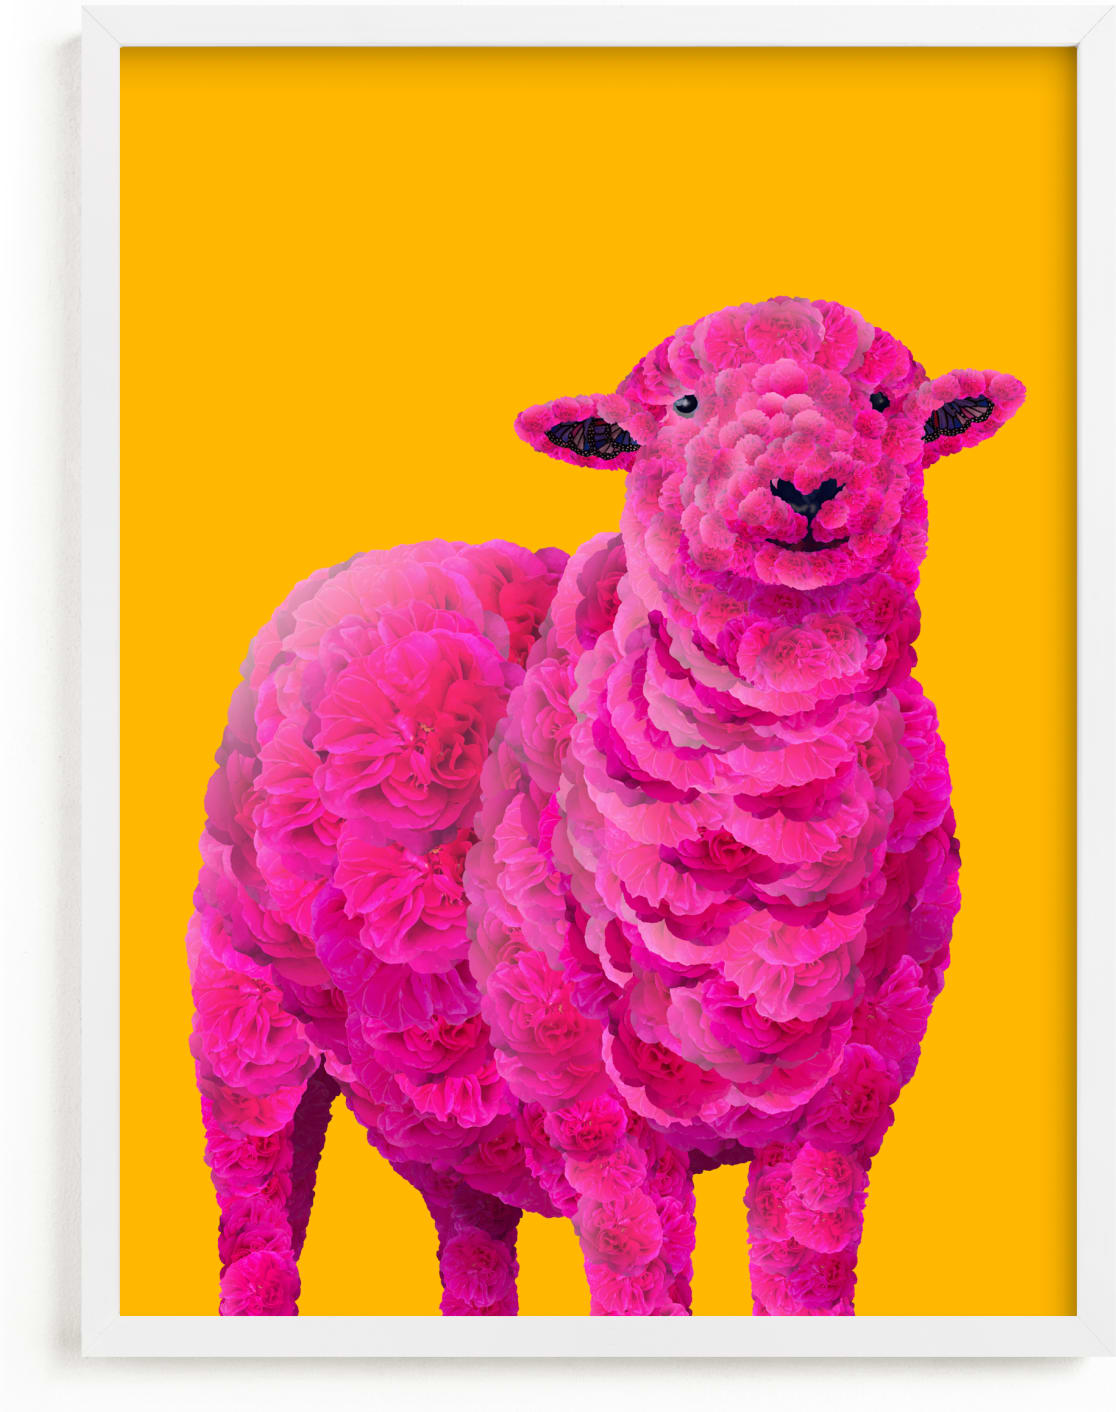 This is a colorful, yellow, pink art by Laura Gatewood called Fiona.